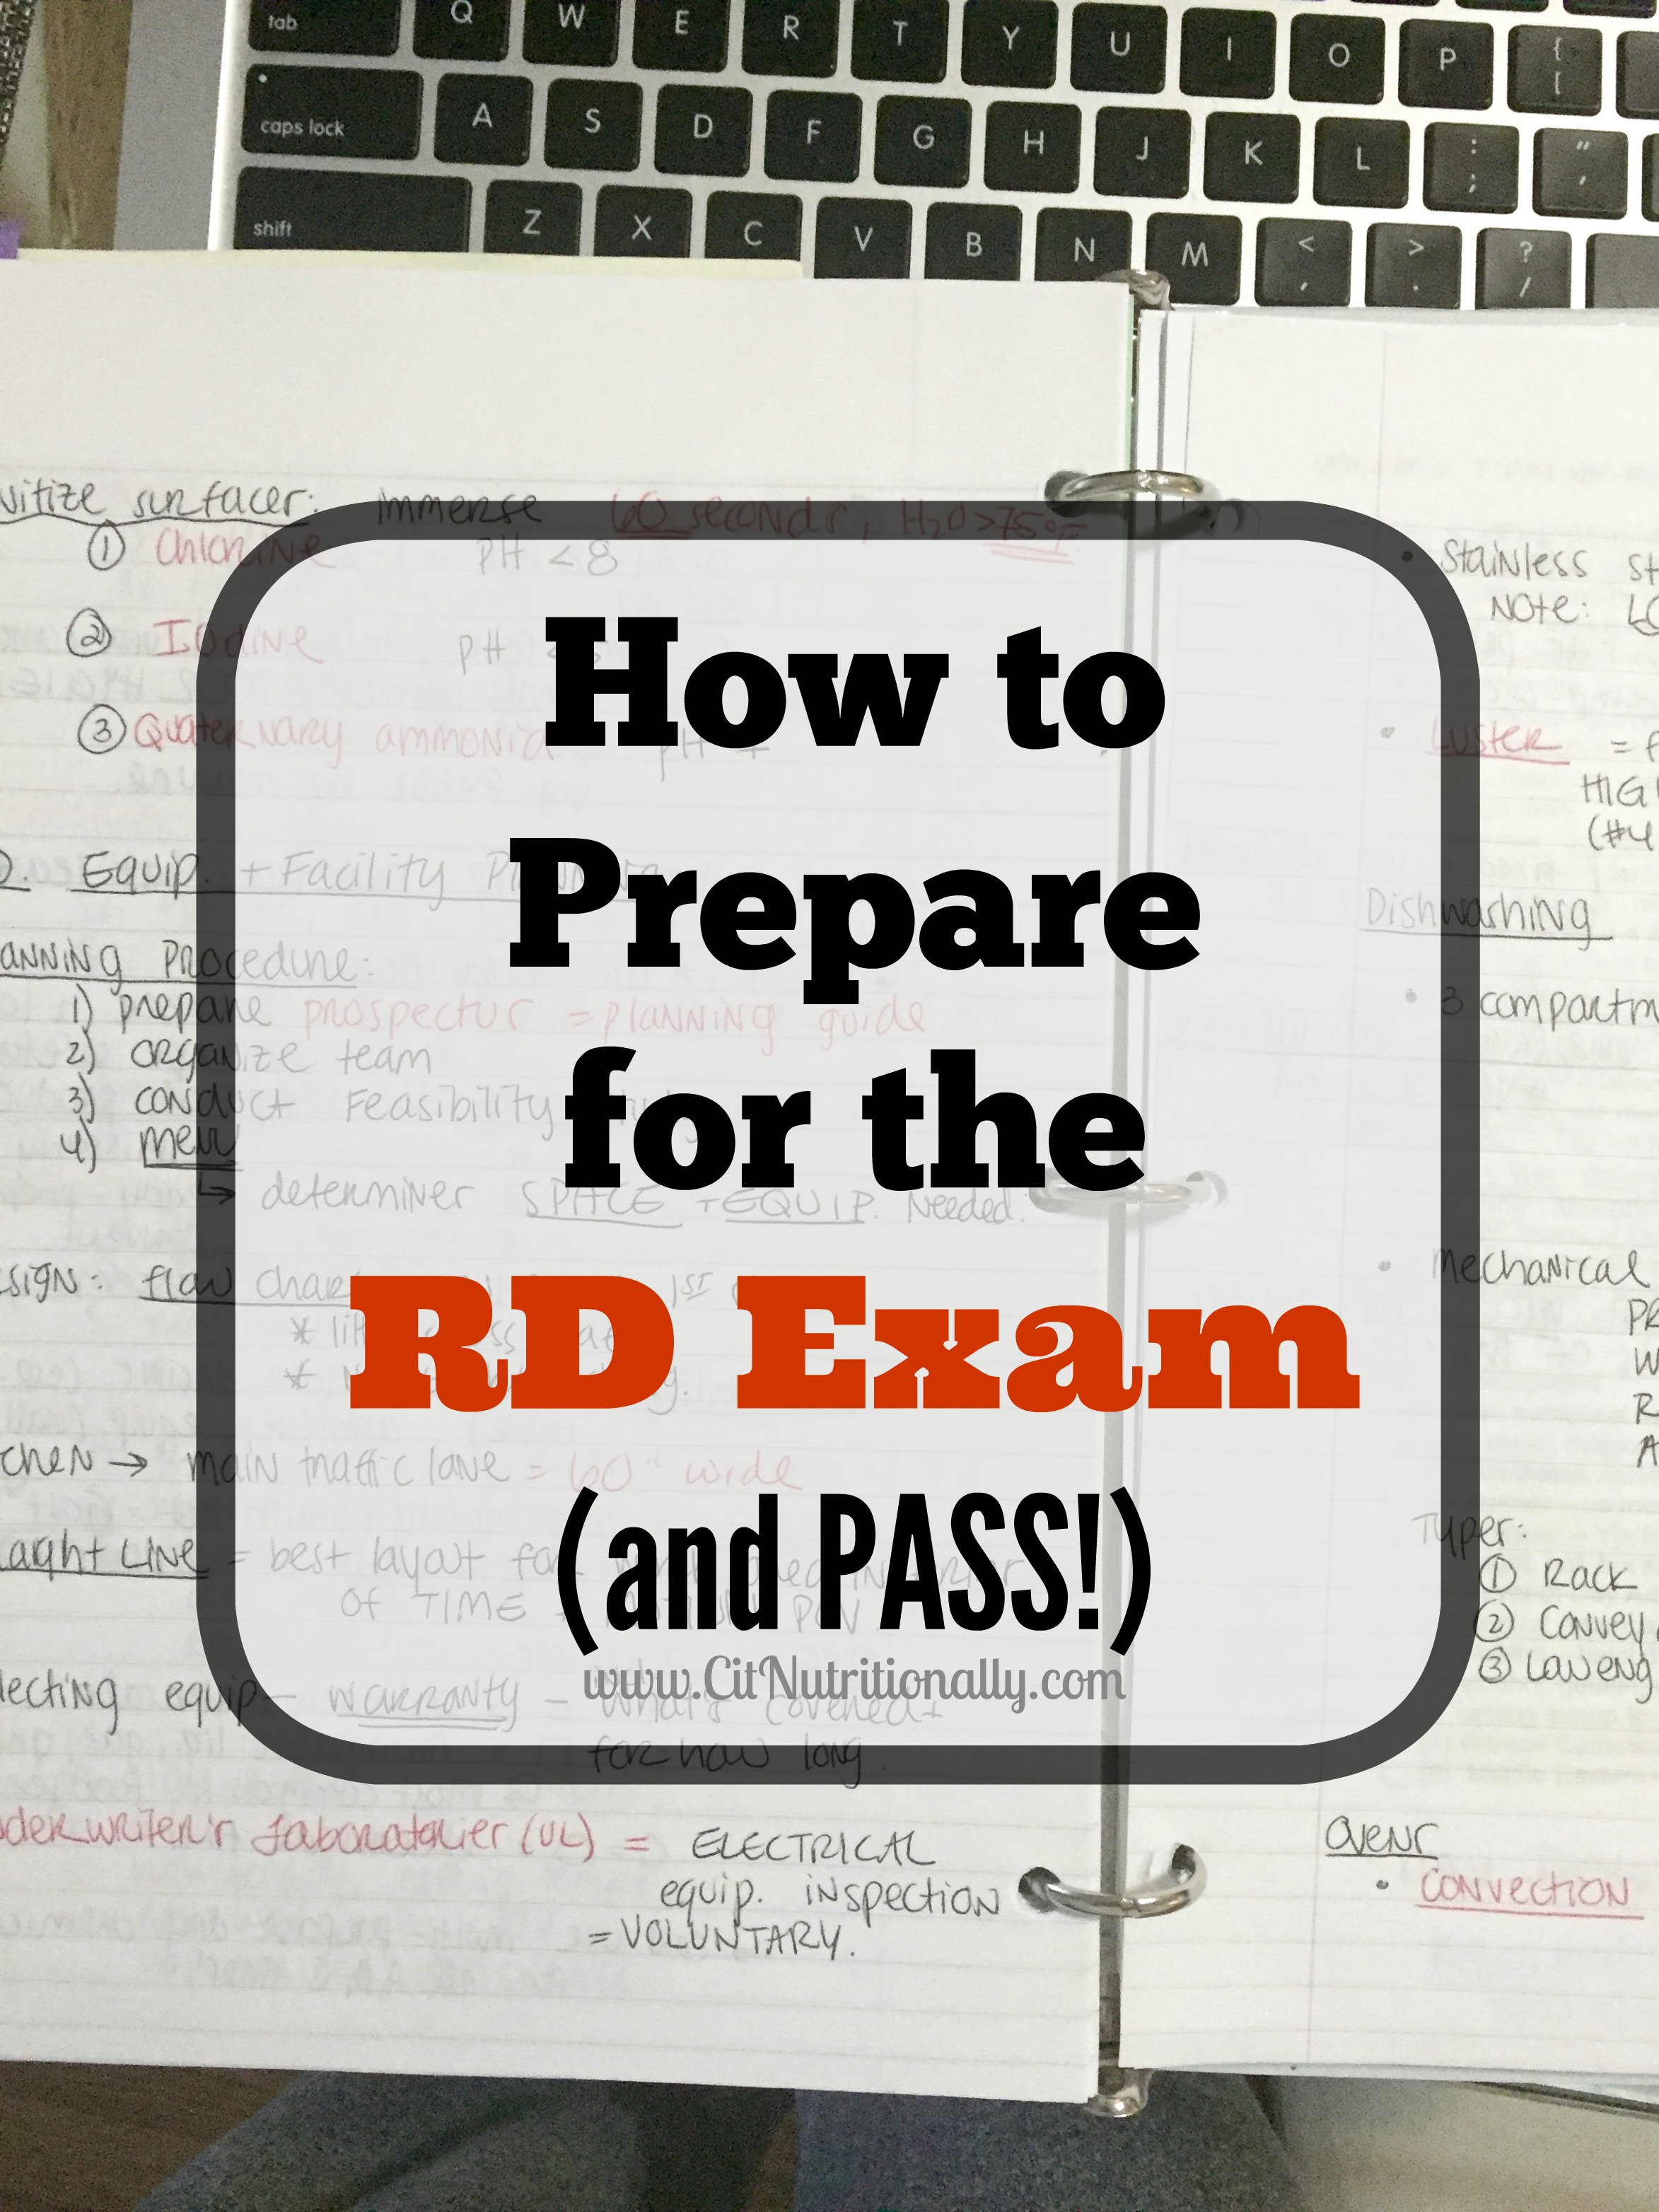 How to Prepare for the RD Exam | C it Nutritionally #RD2be #dietitian #nutritionist #nutrition #dieteticintern